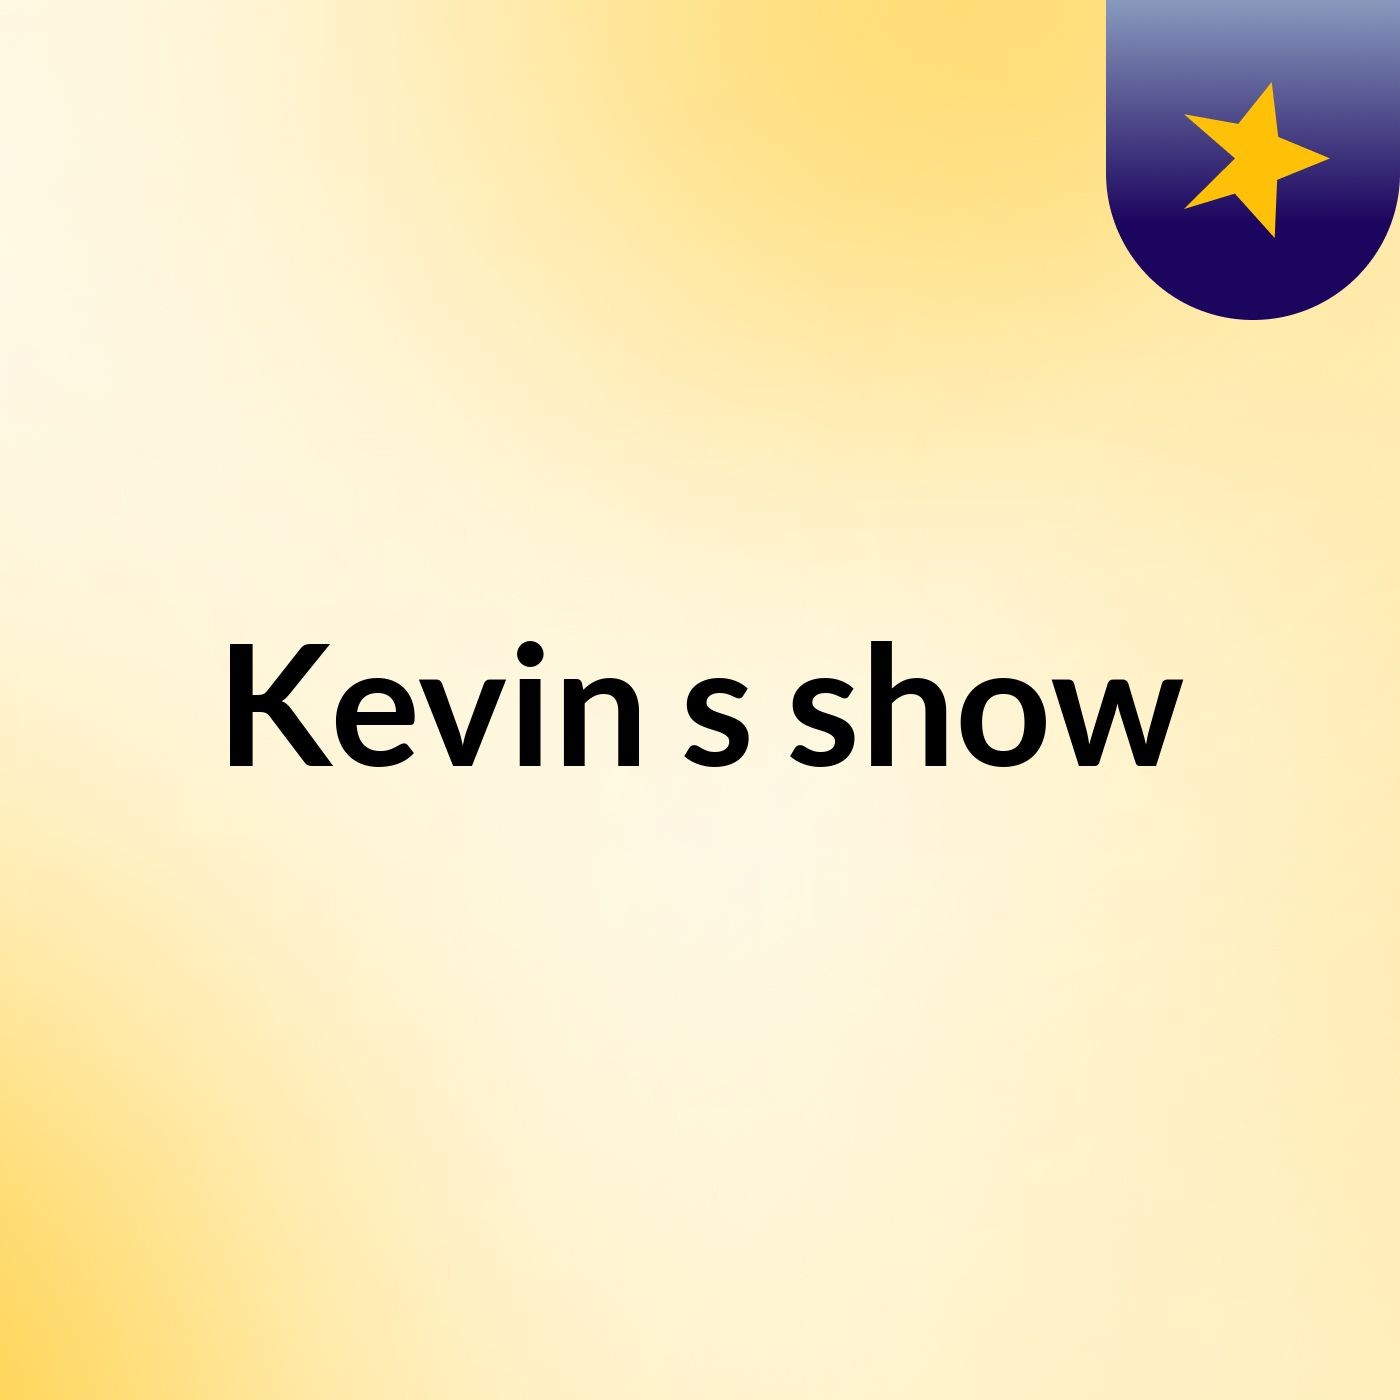 Kevin's show